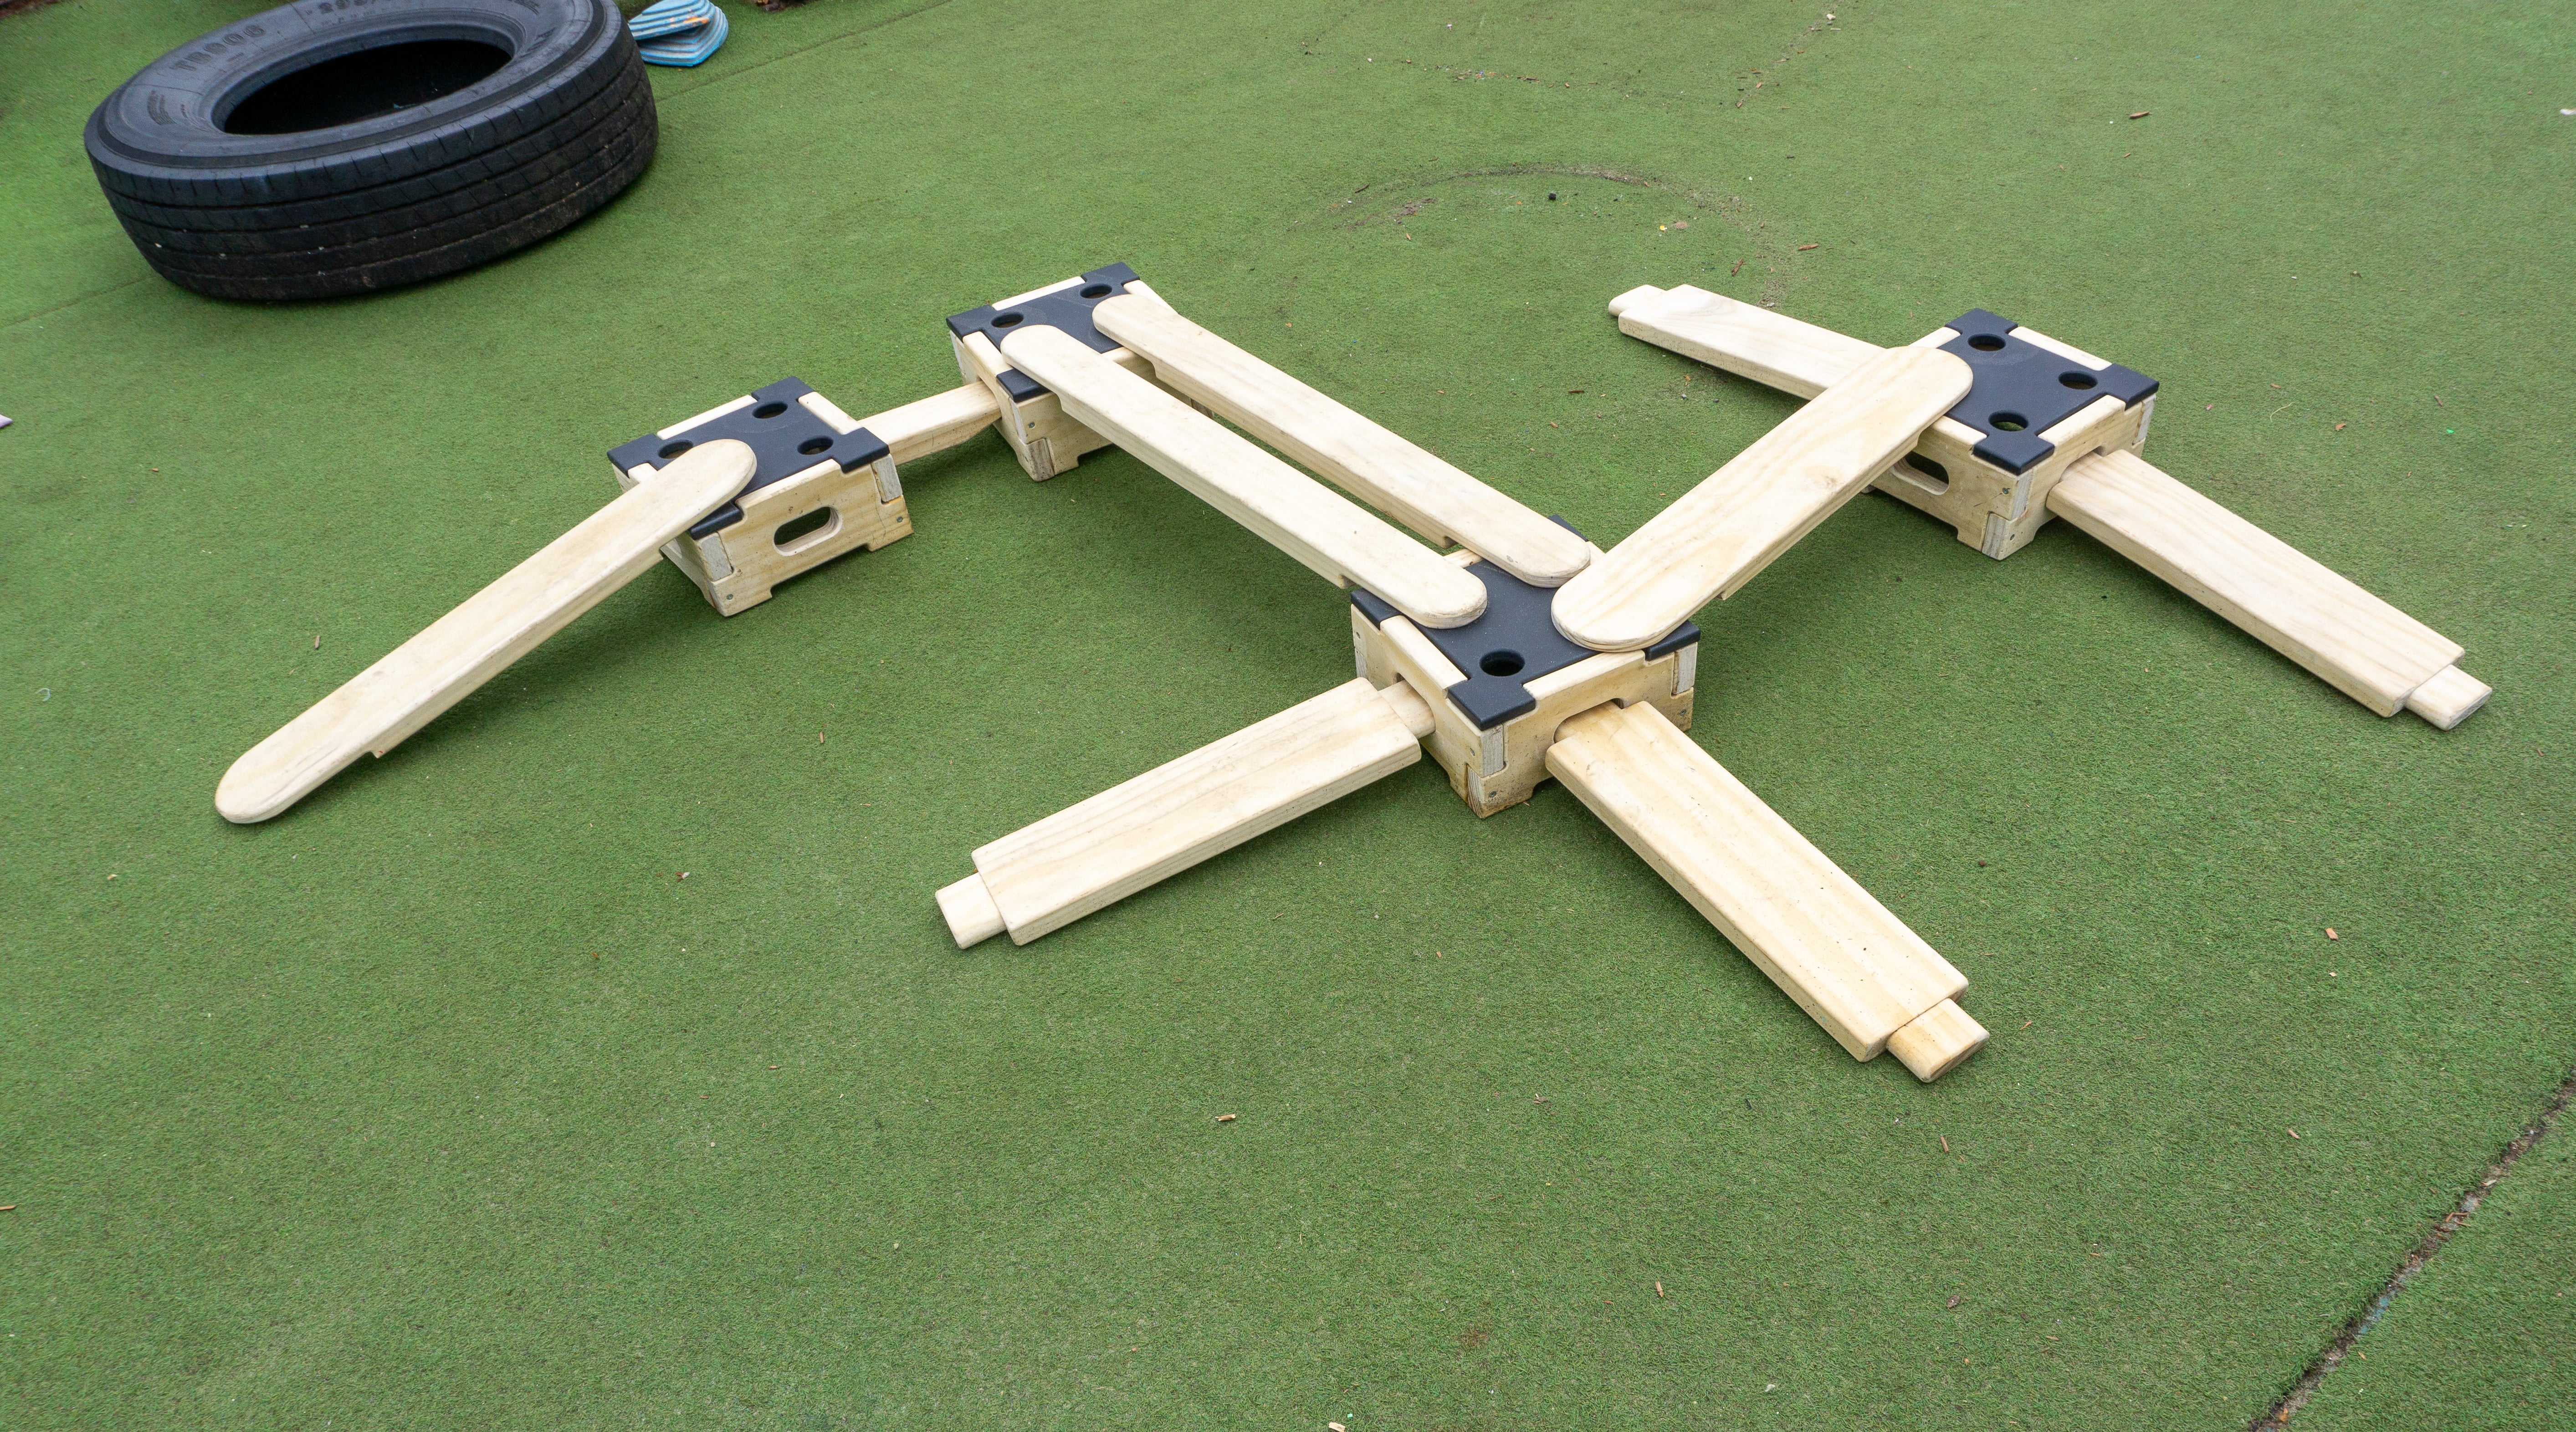 The Play Builder Apprentice set laid on top of artificial grass. 9 planks and 4 blocks can be see on the photo as they connect to form a random shape.